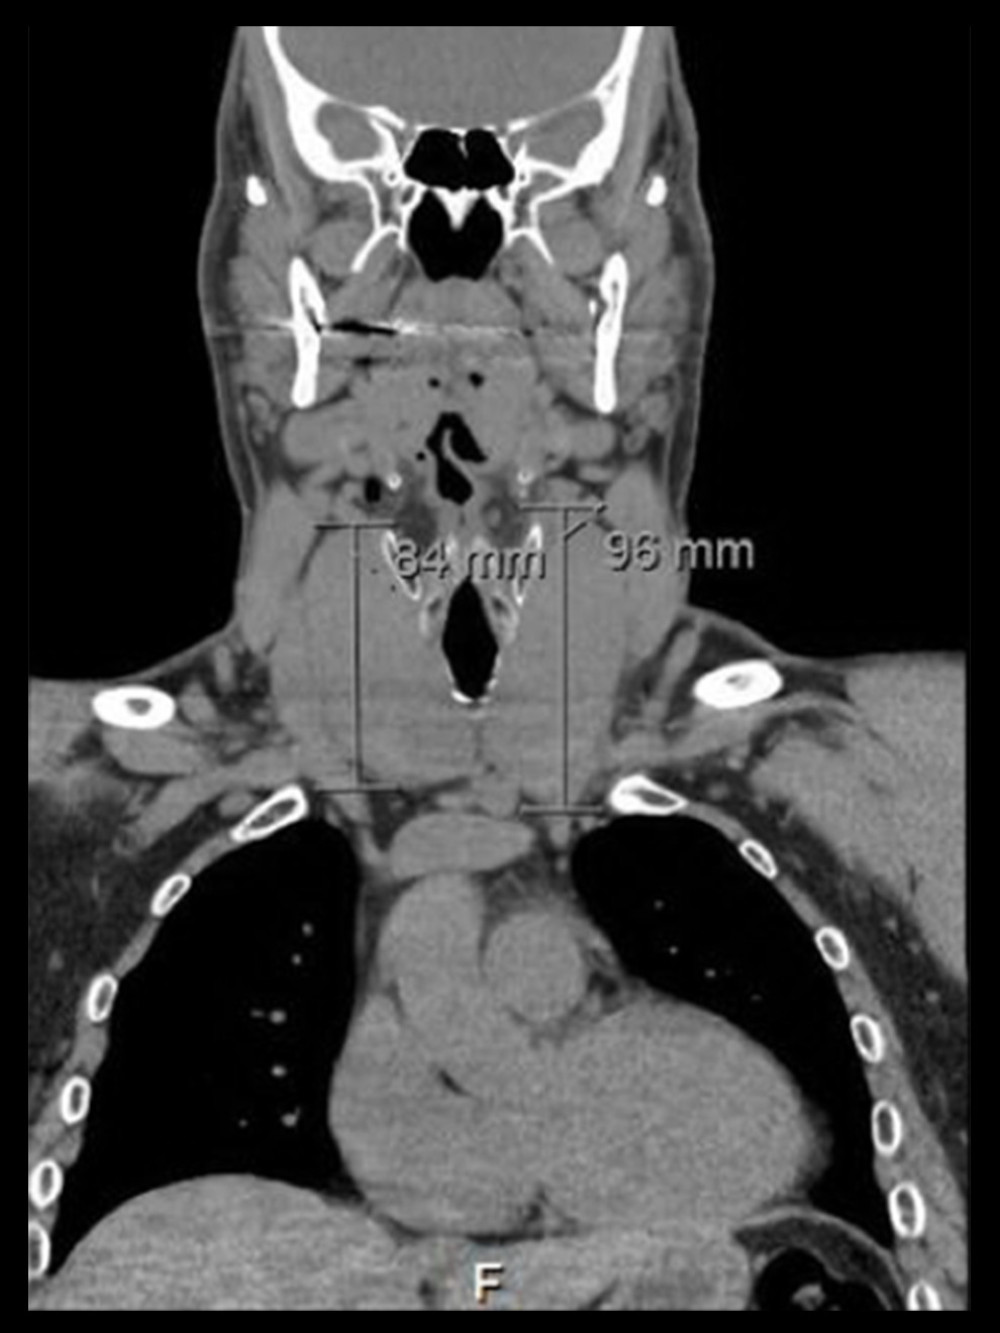 CT scan showing diffuse enlargement of the thyroid with no retrosternal extension or invasion of surrounding structures.